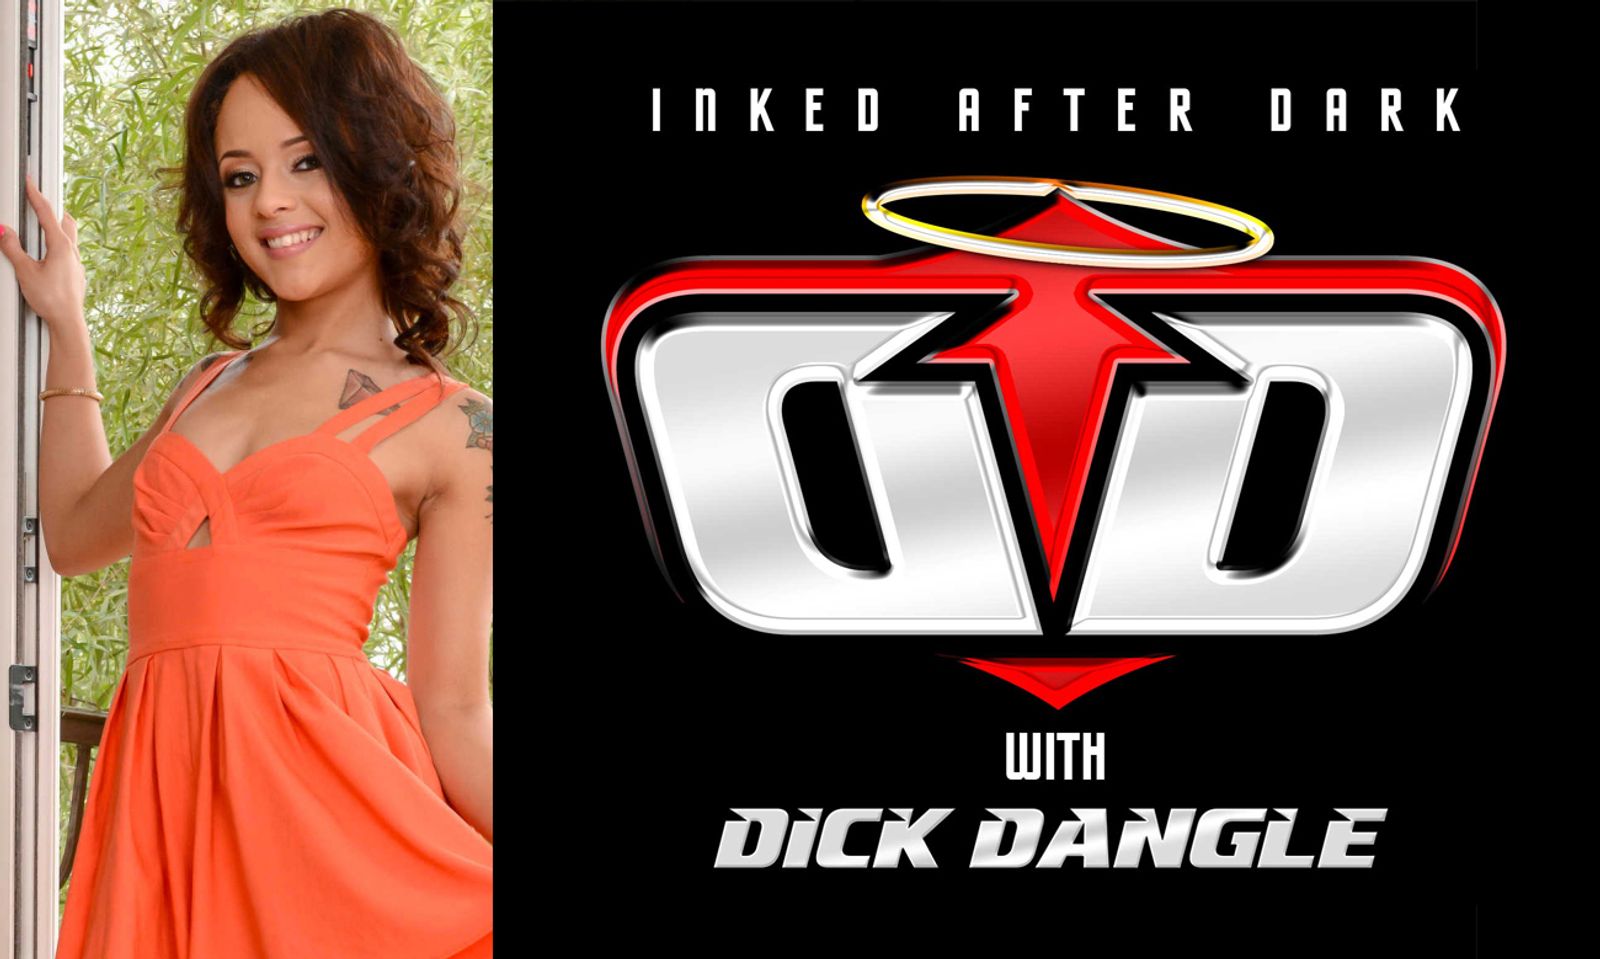 Holly Hendrix Interviewed on 'Inked After Dark With Dick Dangle'